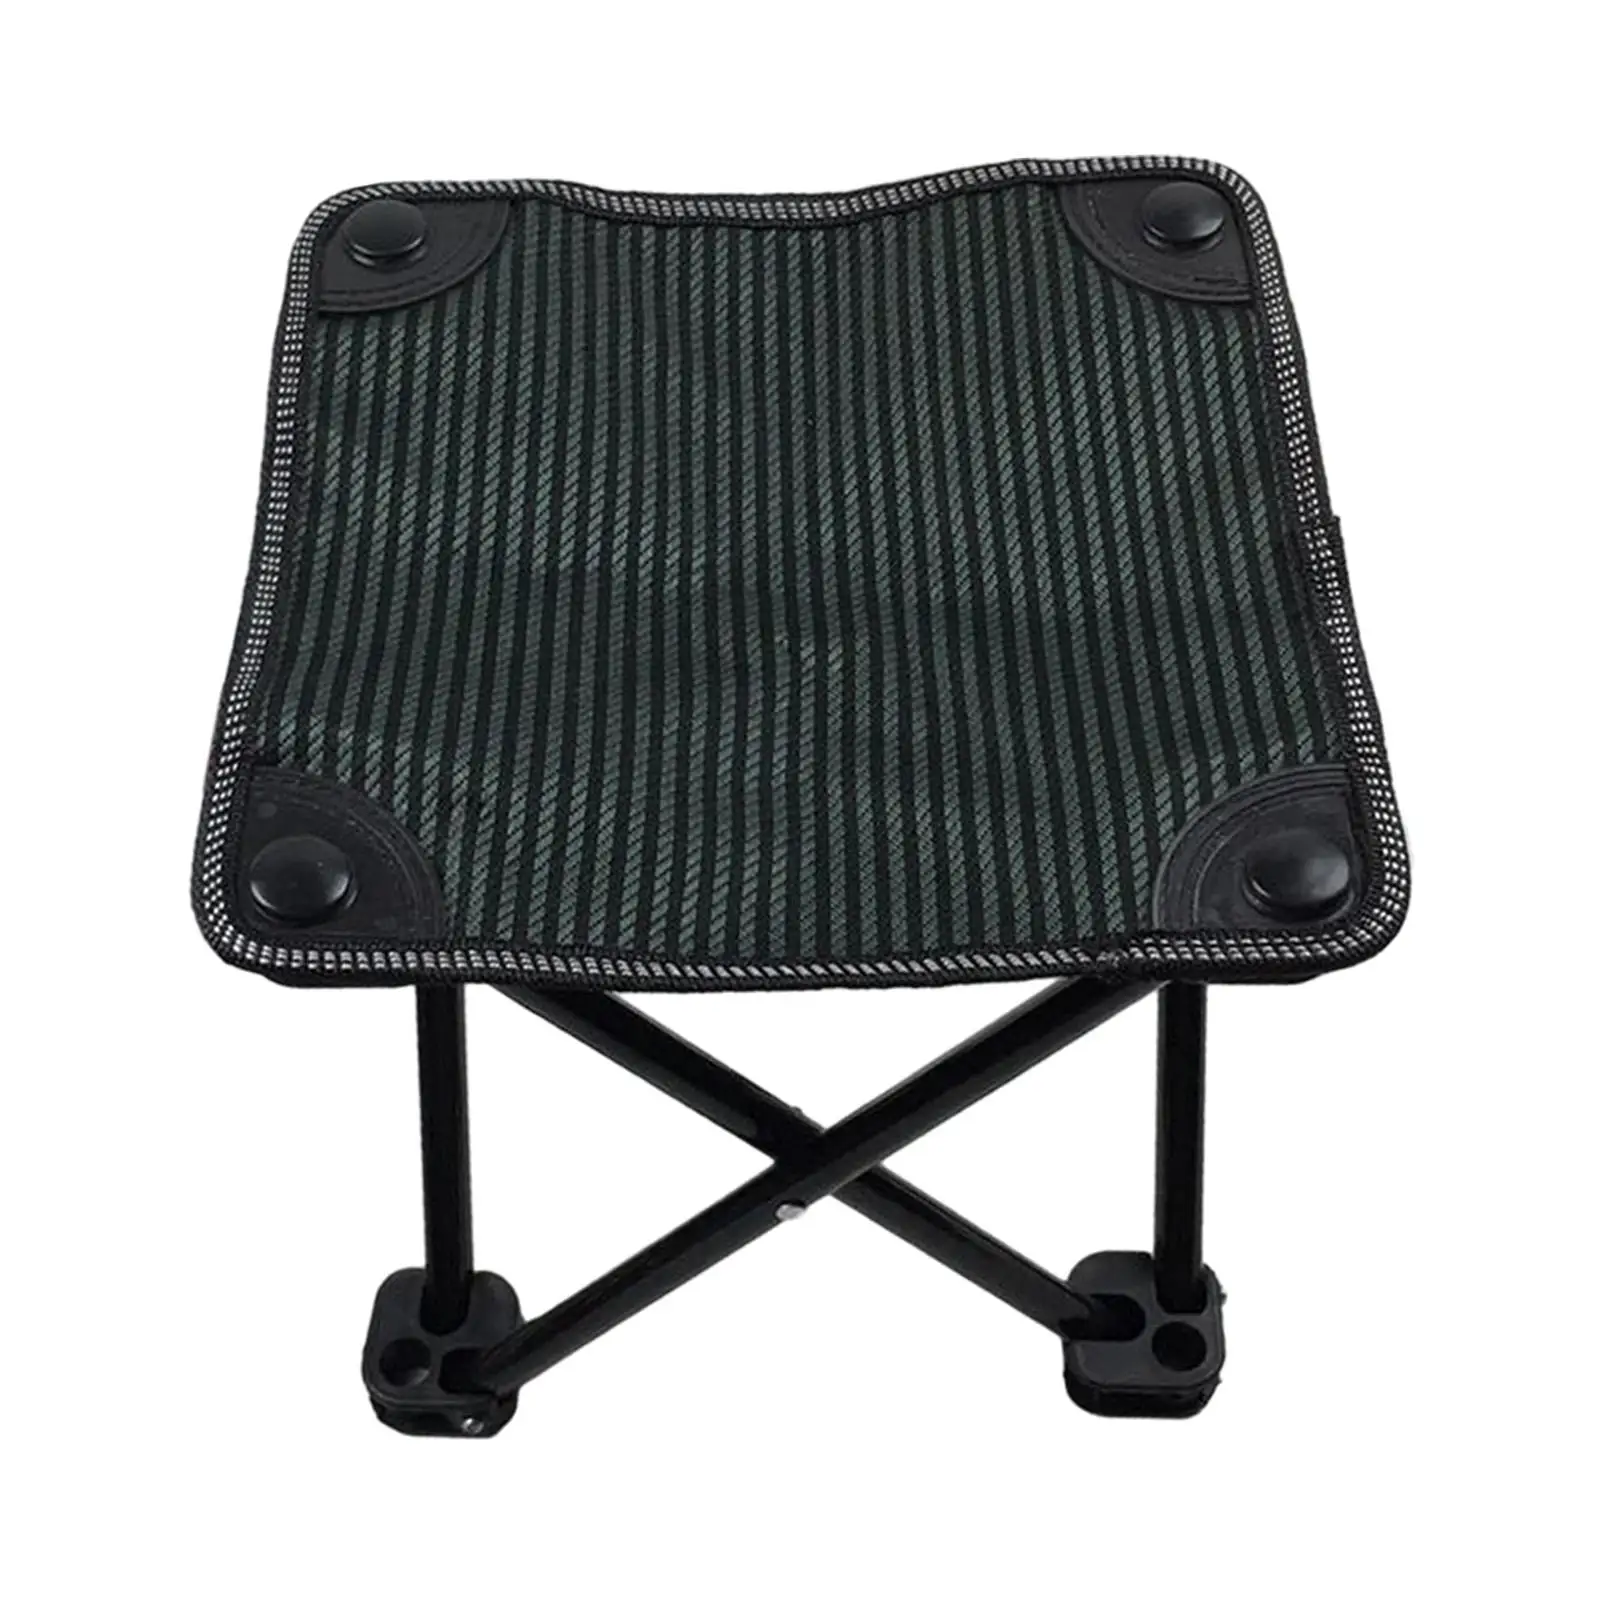 Folding Camping Stool under Desk Footstool Foot Stool Compact Collapsible Stool for Sports Picnic Gardening Festival Fishing